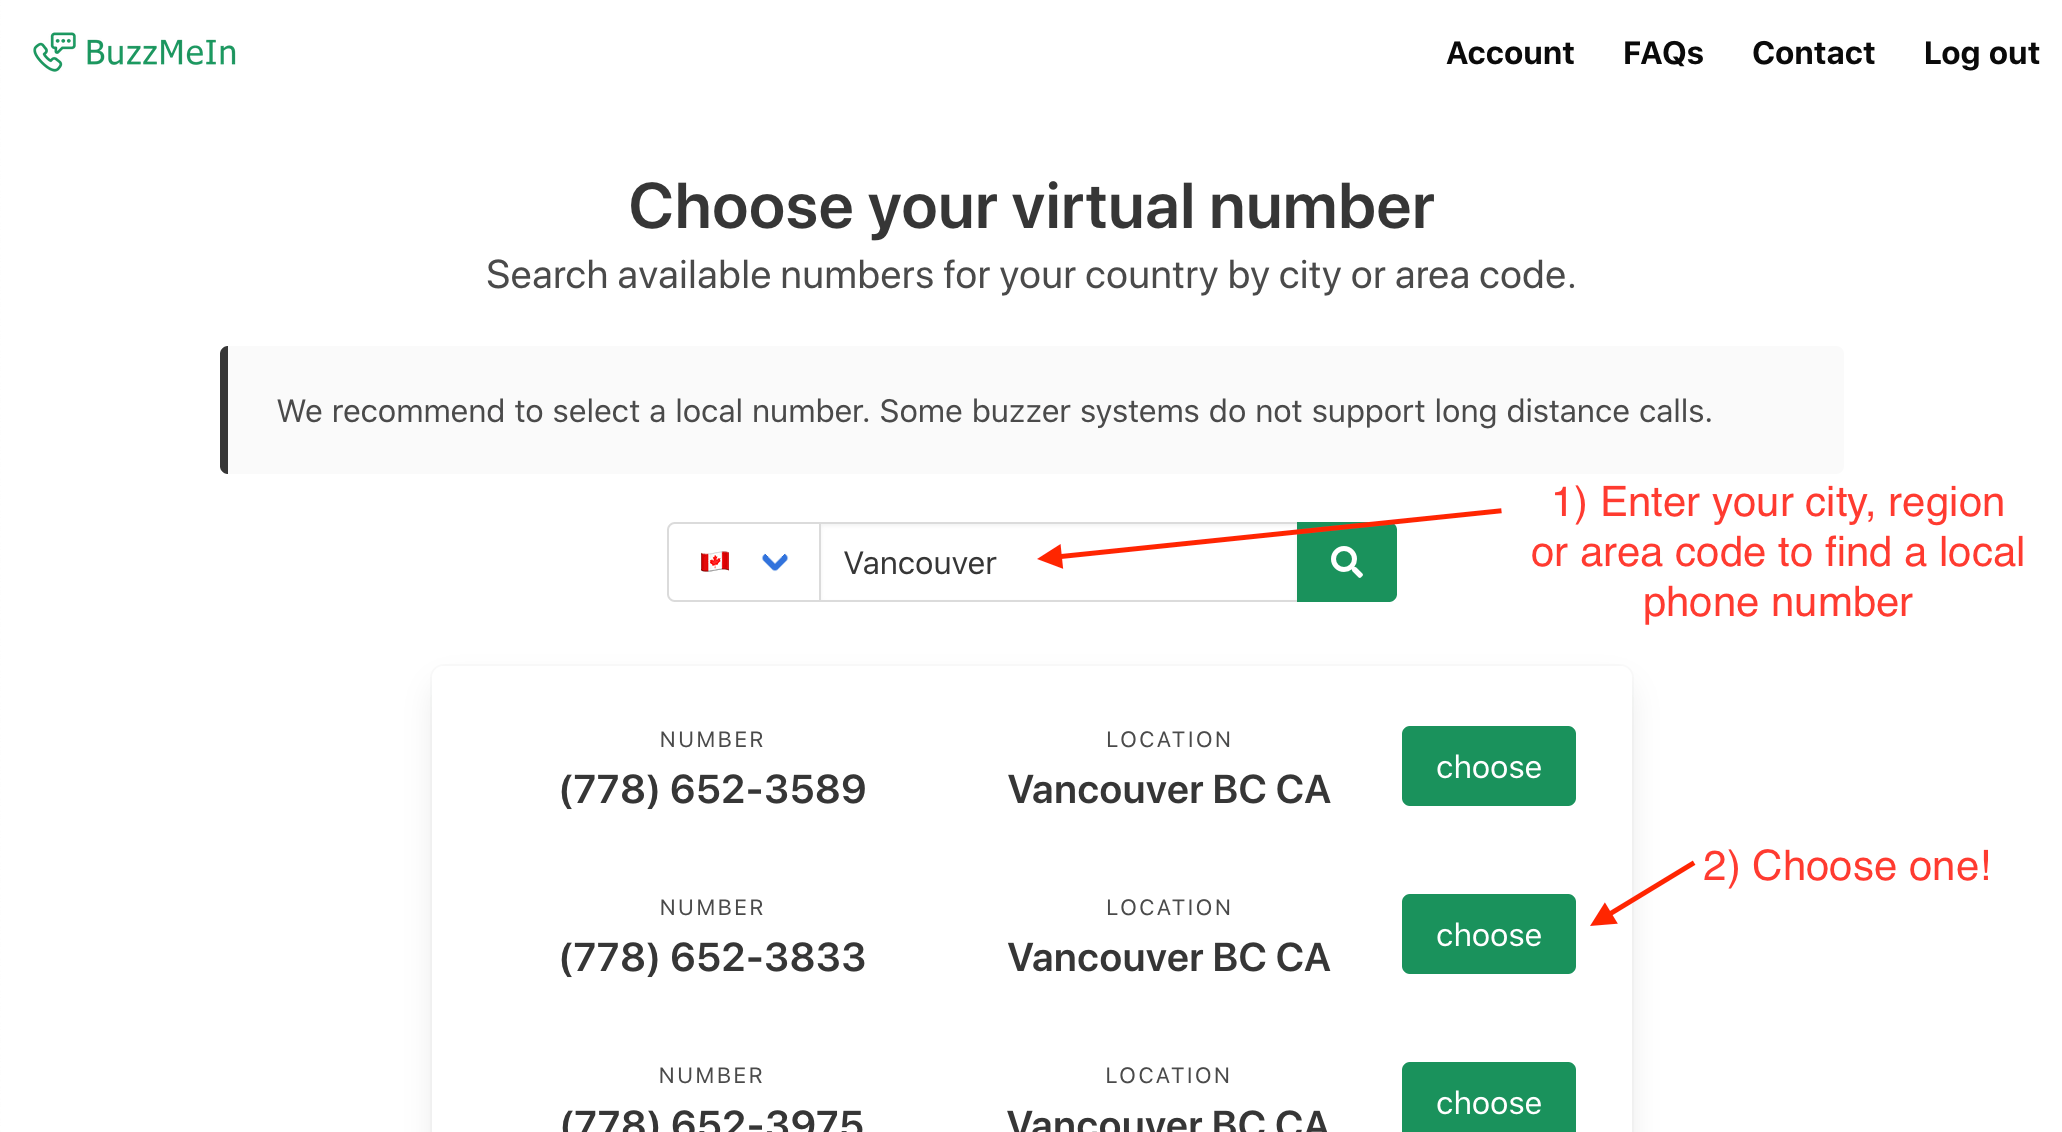 Choose your personal BuzzMeIn number - search by city or area code